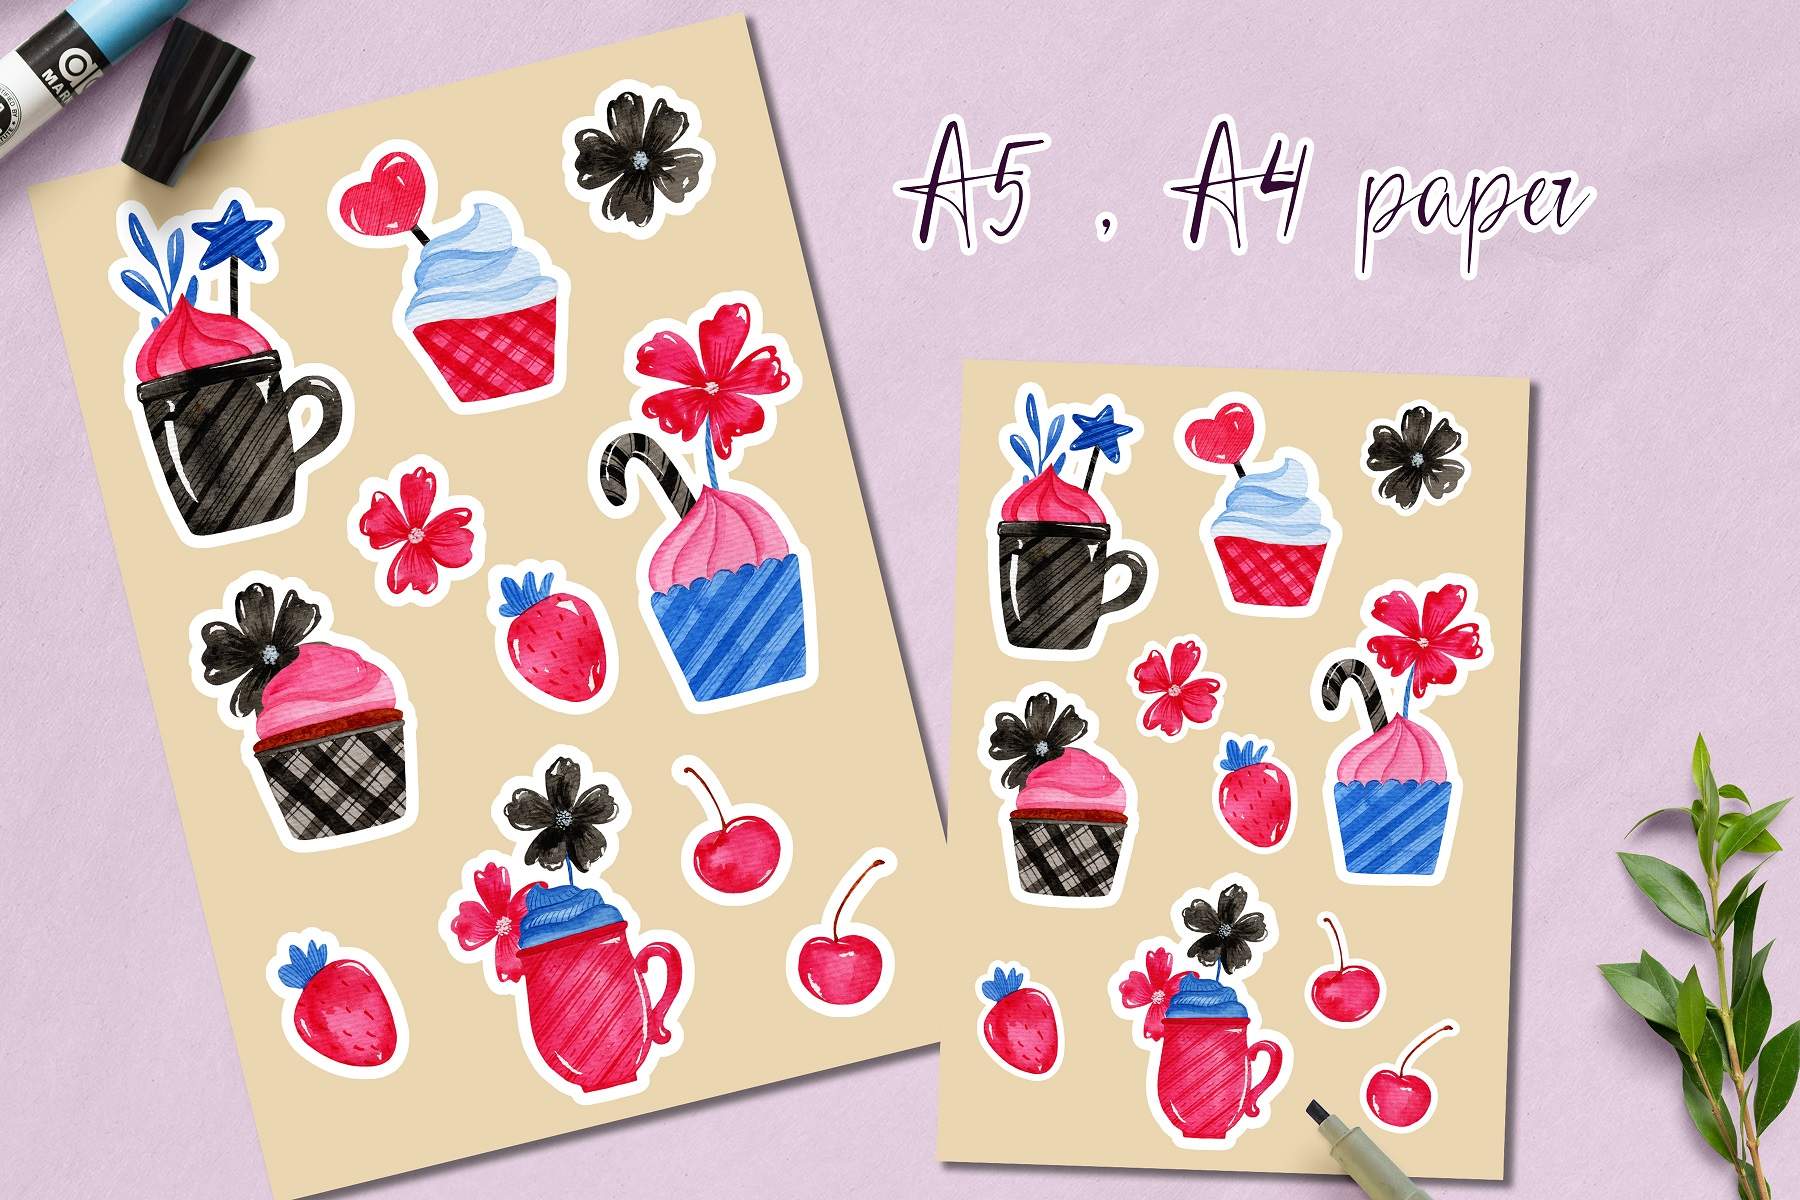 Pair of stickers of coffee cups and cherries.